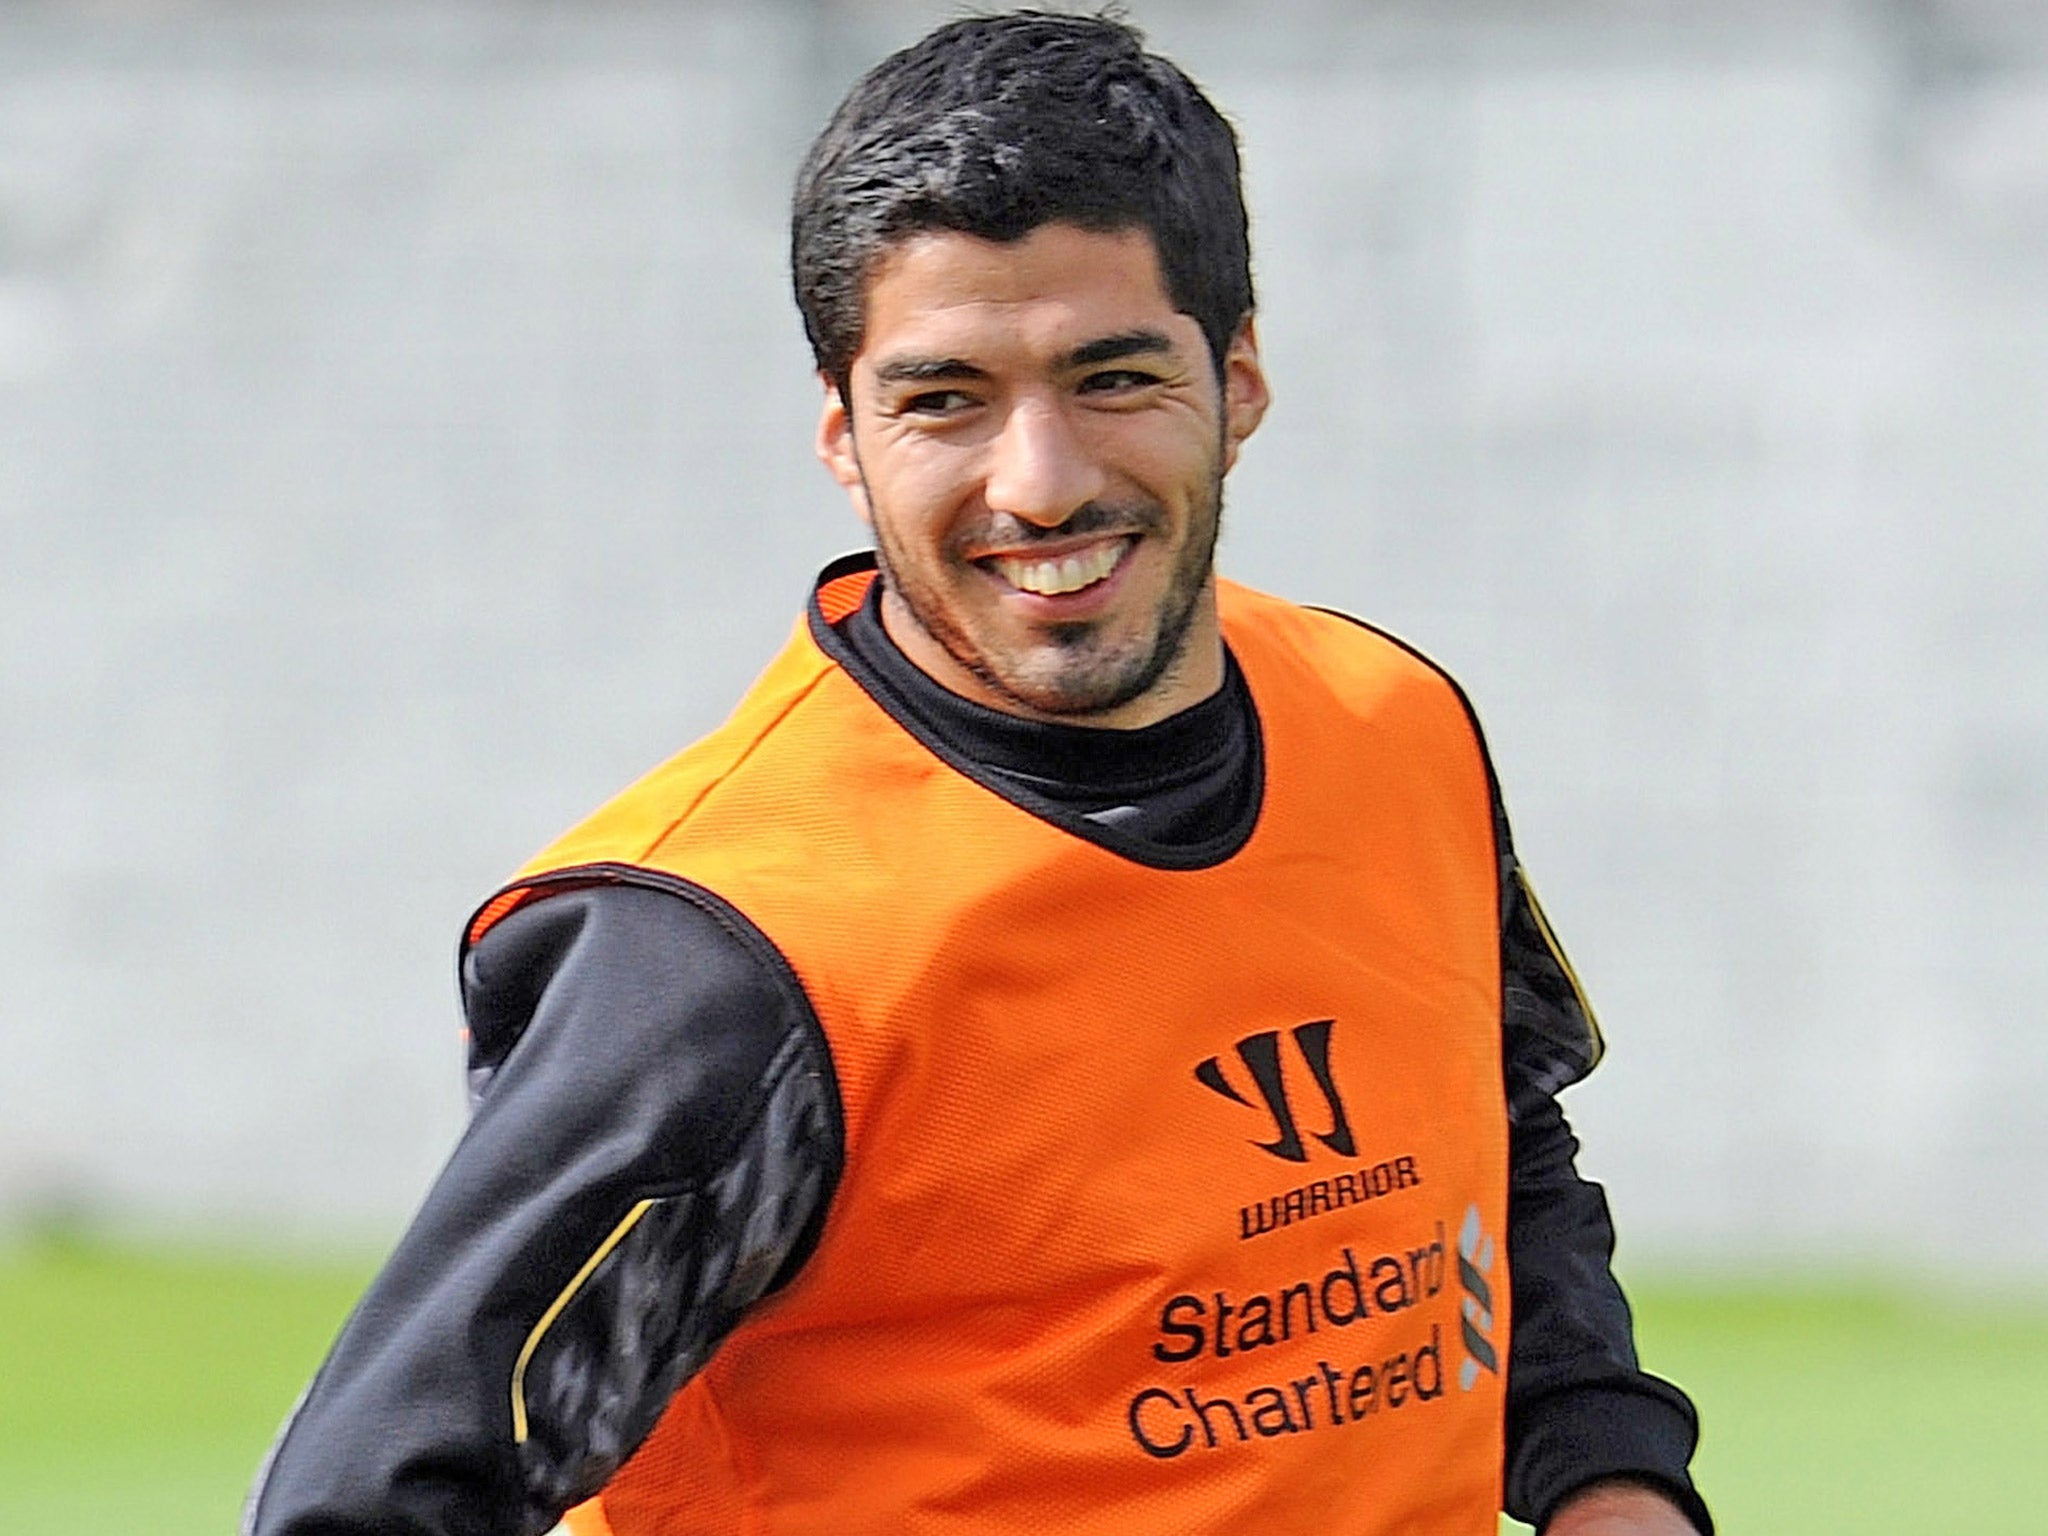 Luis Suarez trains at Melwood having completed his 10-game ban